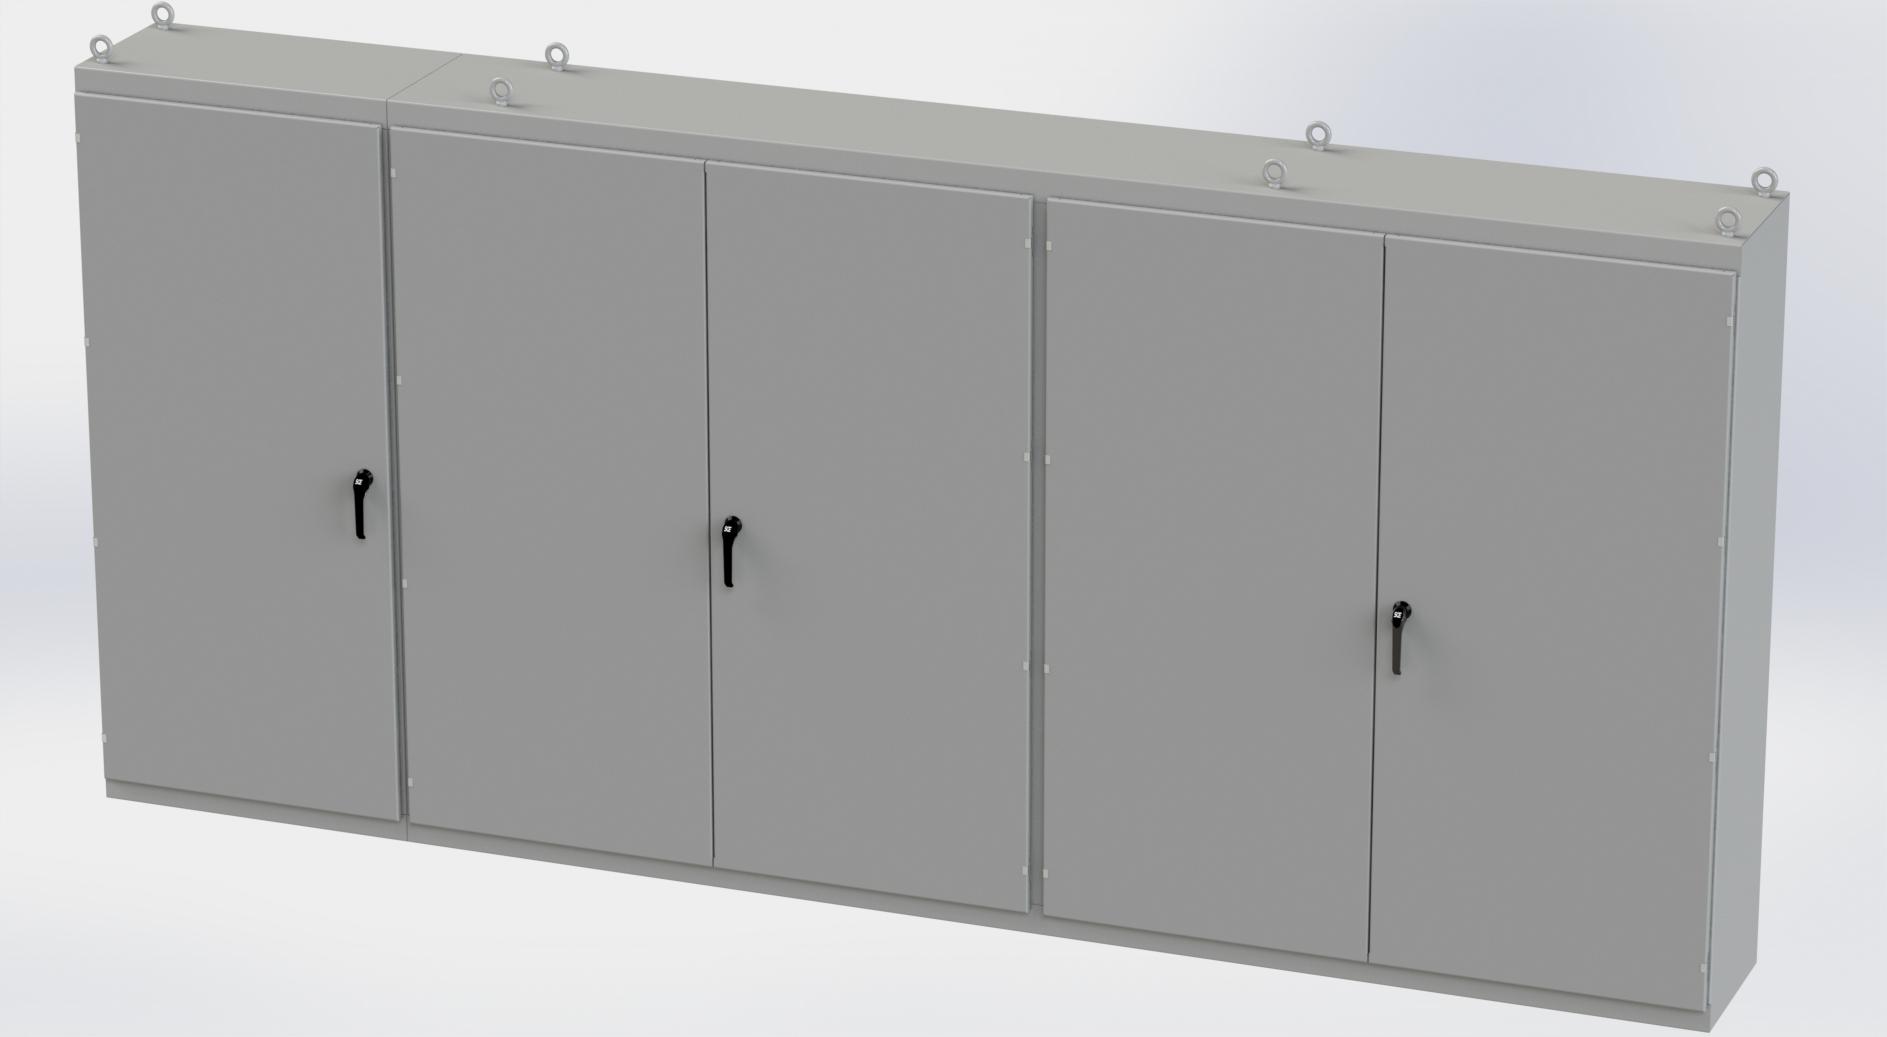 Saginaw Control SCE-86M5E20 Enclosure, Multi-Door, Height:86.00", Width:187.00", Depth:20.00", ANSI-61 gray powder coating inside and out. Sub-panels are powder coated white.